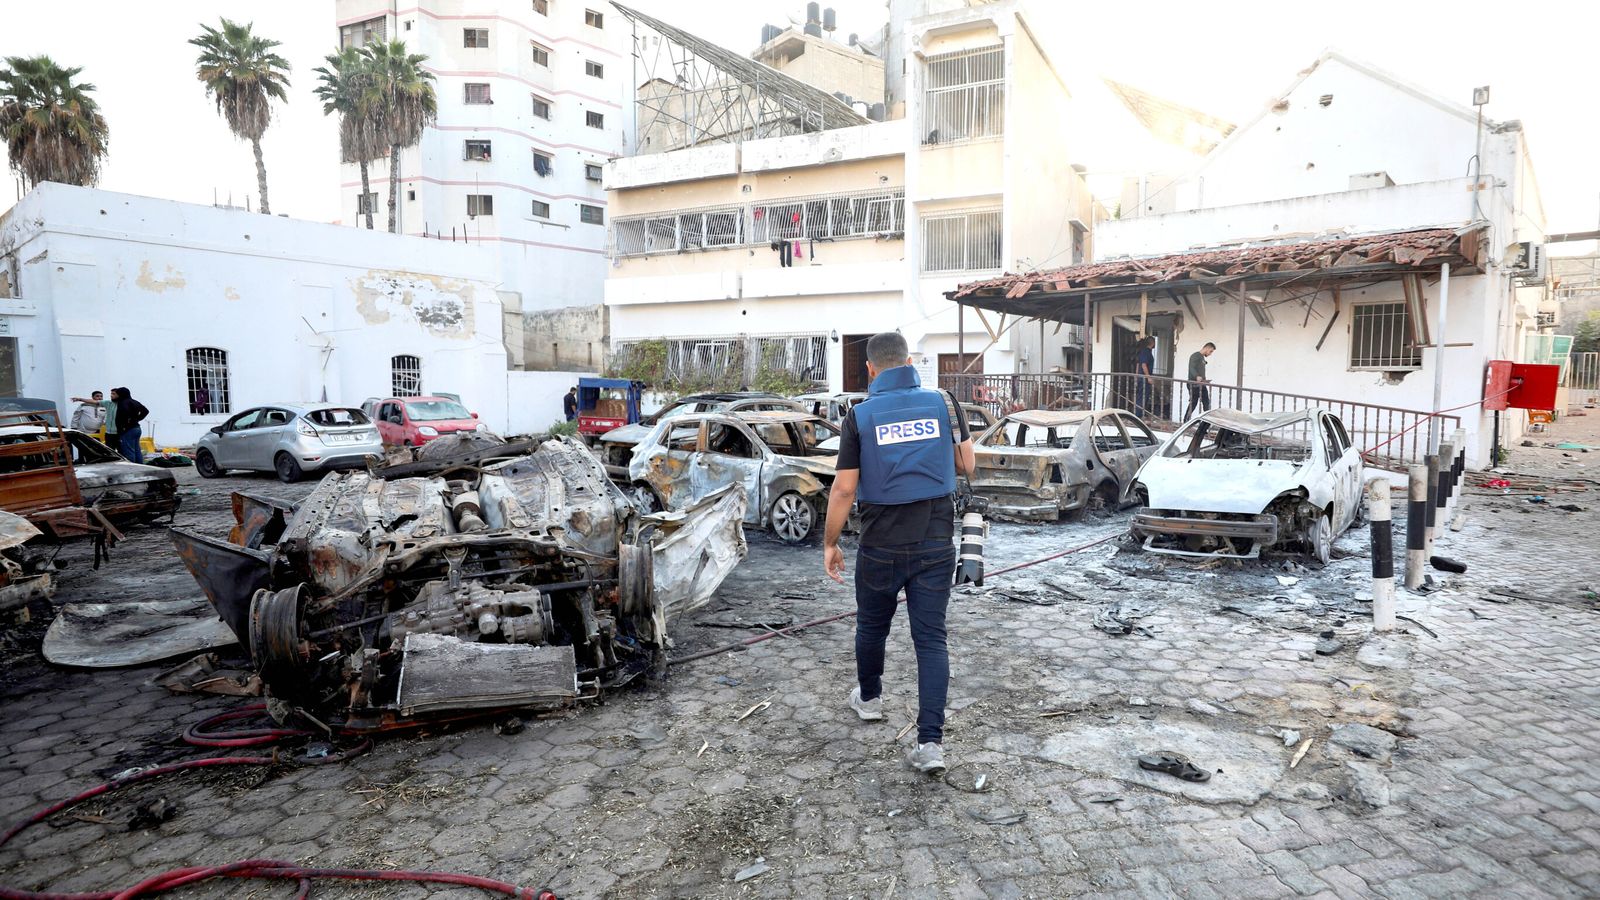 US spy agencies believe hospital blast caused by Palestinian rocket that broke apart after engine failure, officials say